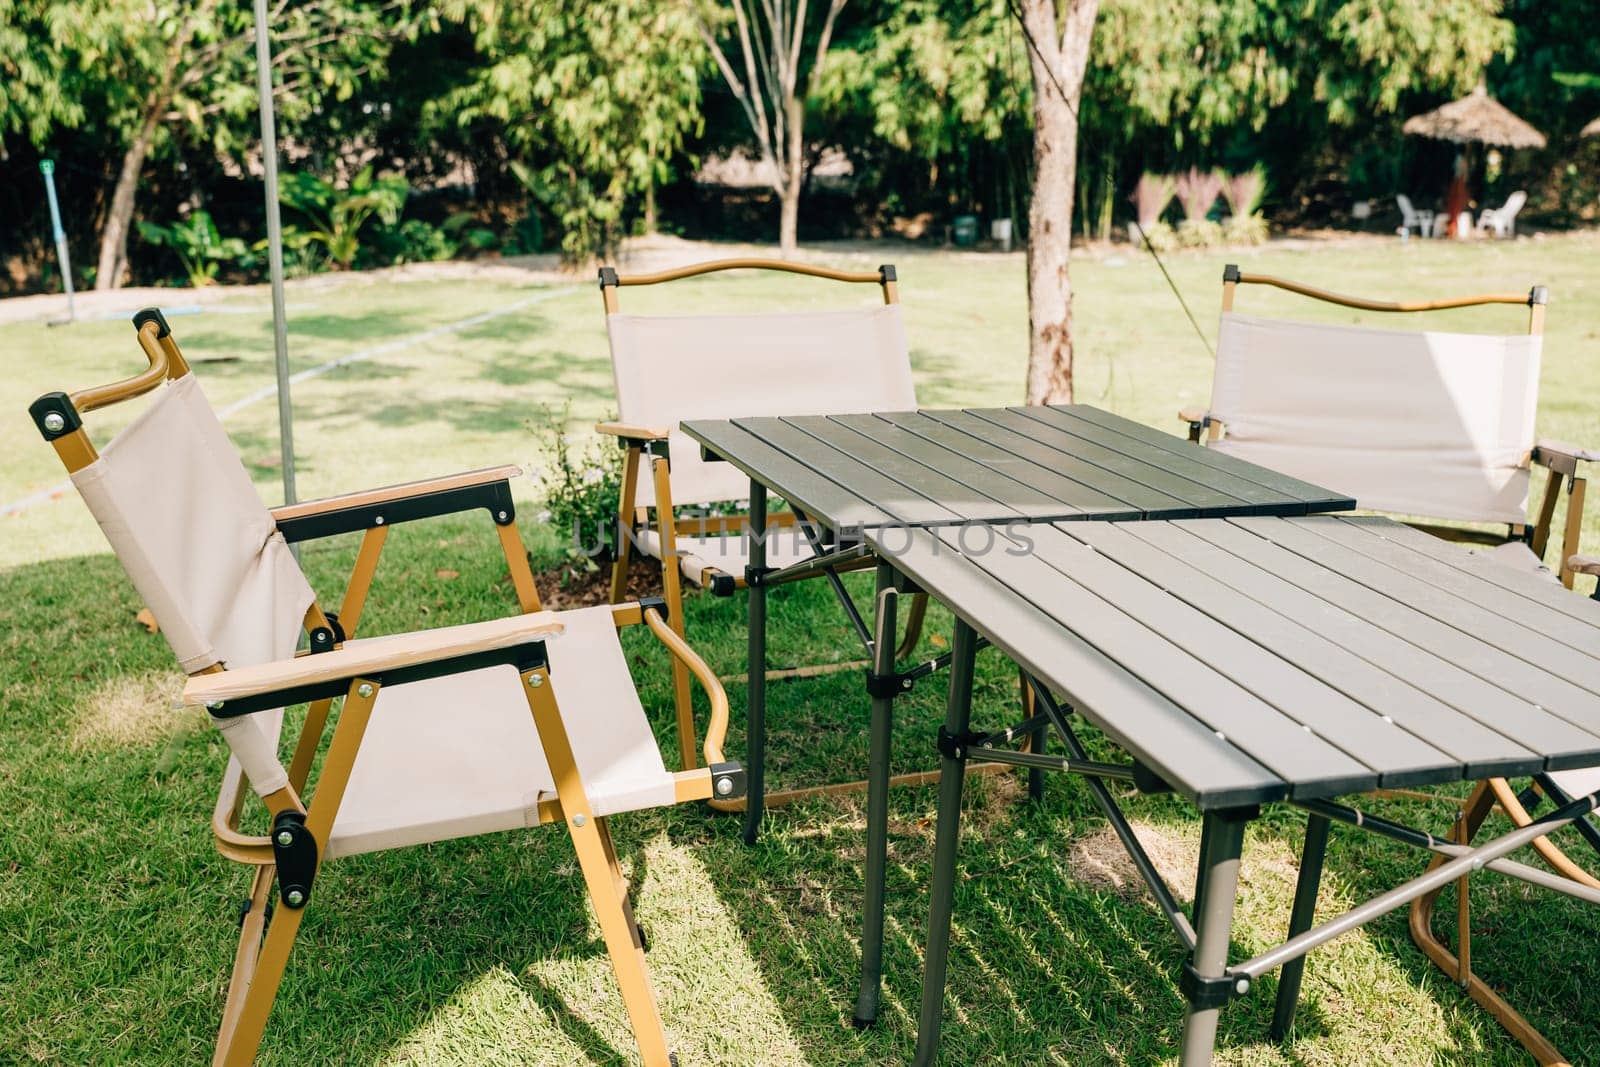 Experience the joy of outdoor camping with a tent, tables, and chairs for your summer picnic. This suburban patio setup provides comfortable seating and shade, perfect for relaxation. by Sorapop